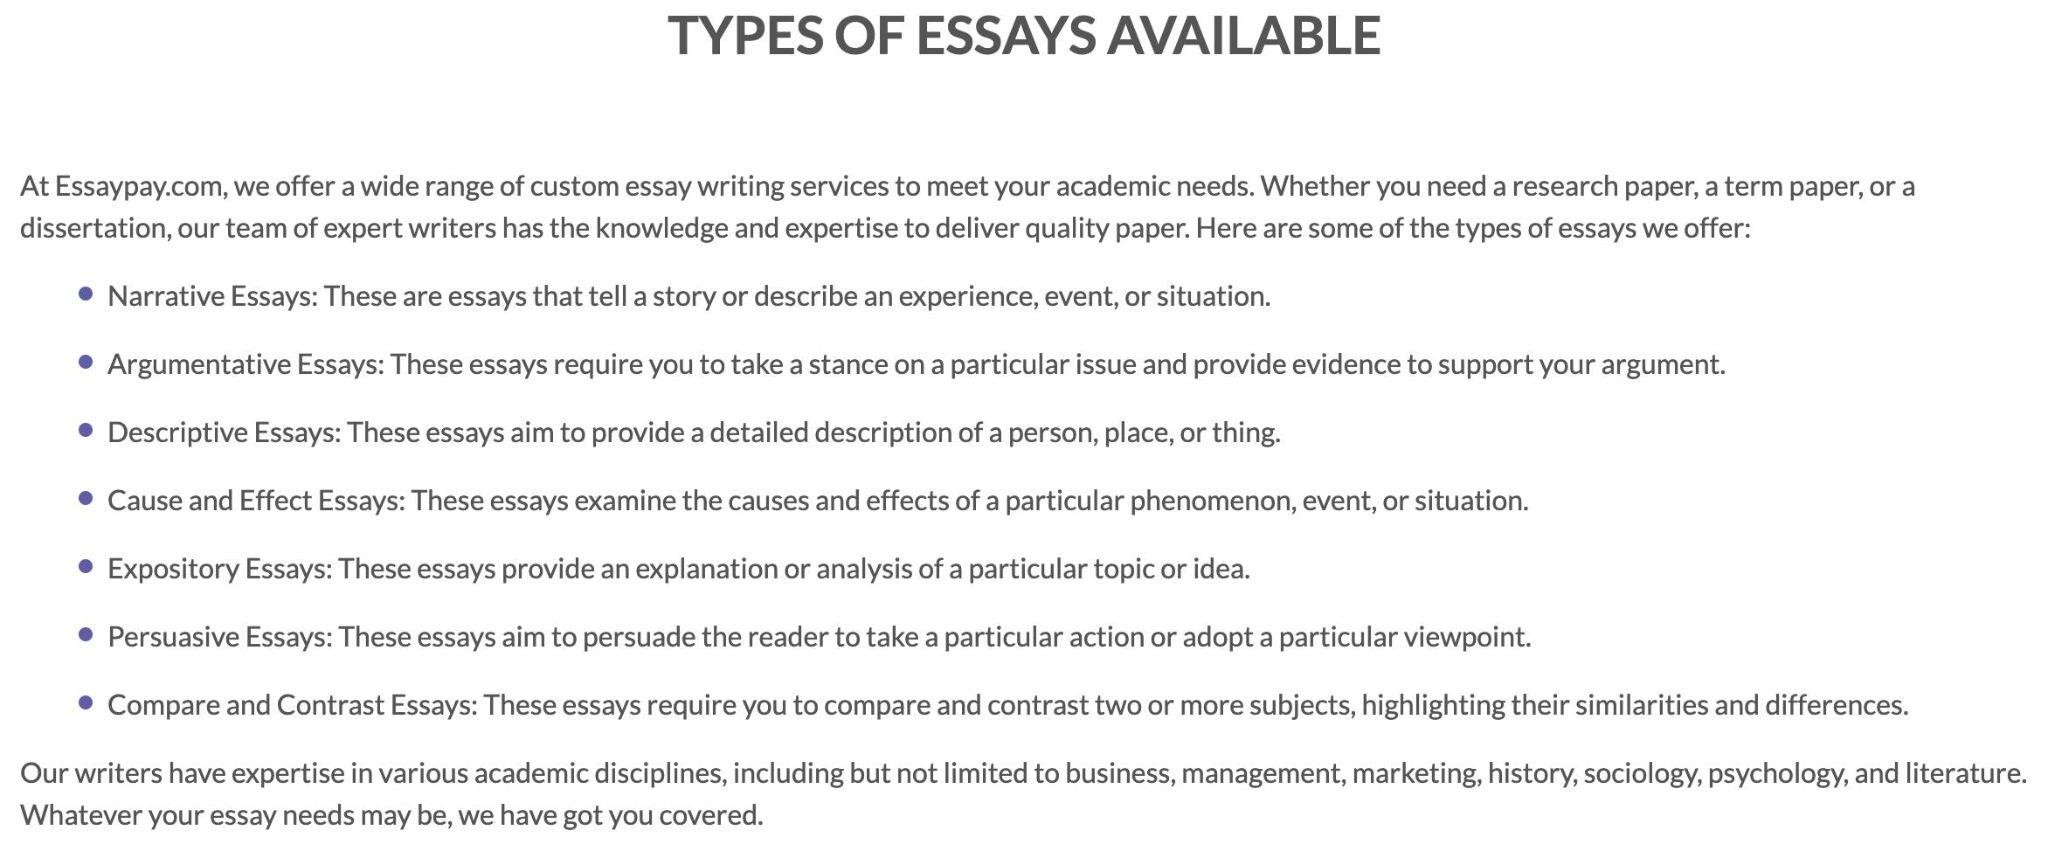 types of essays available